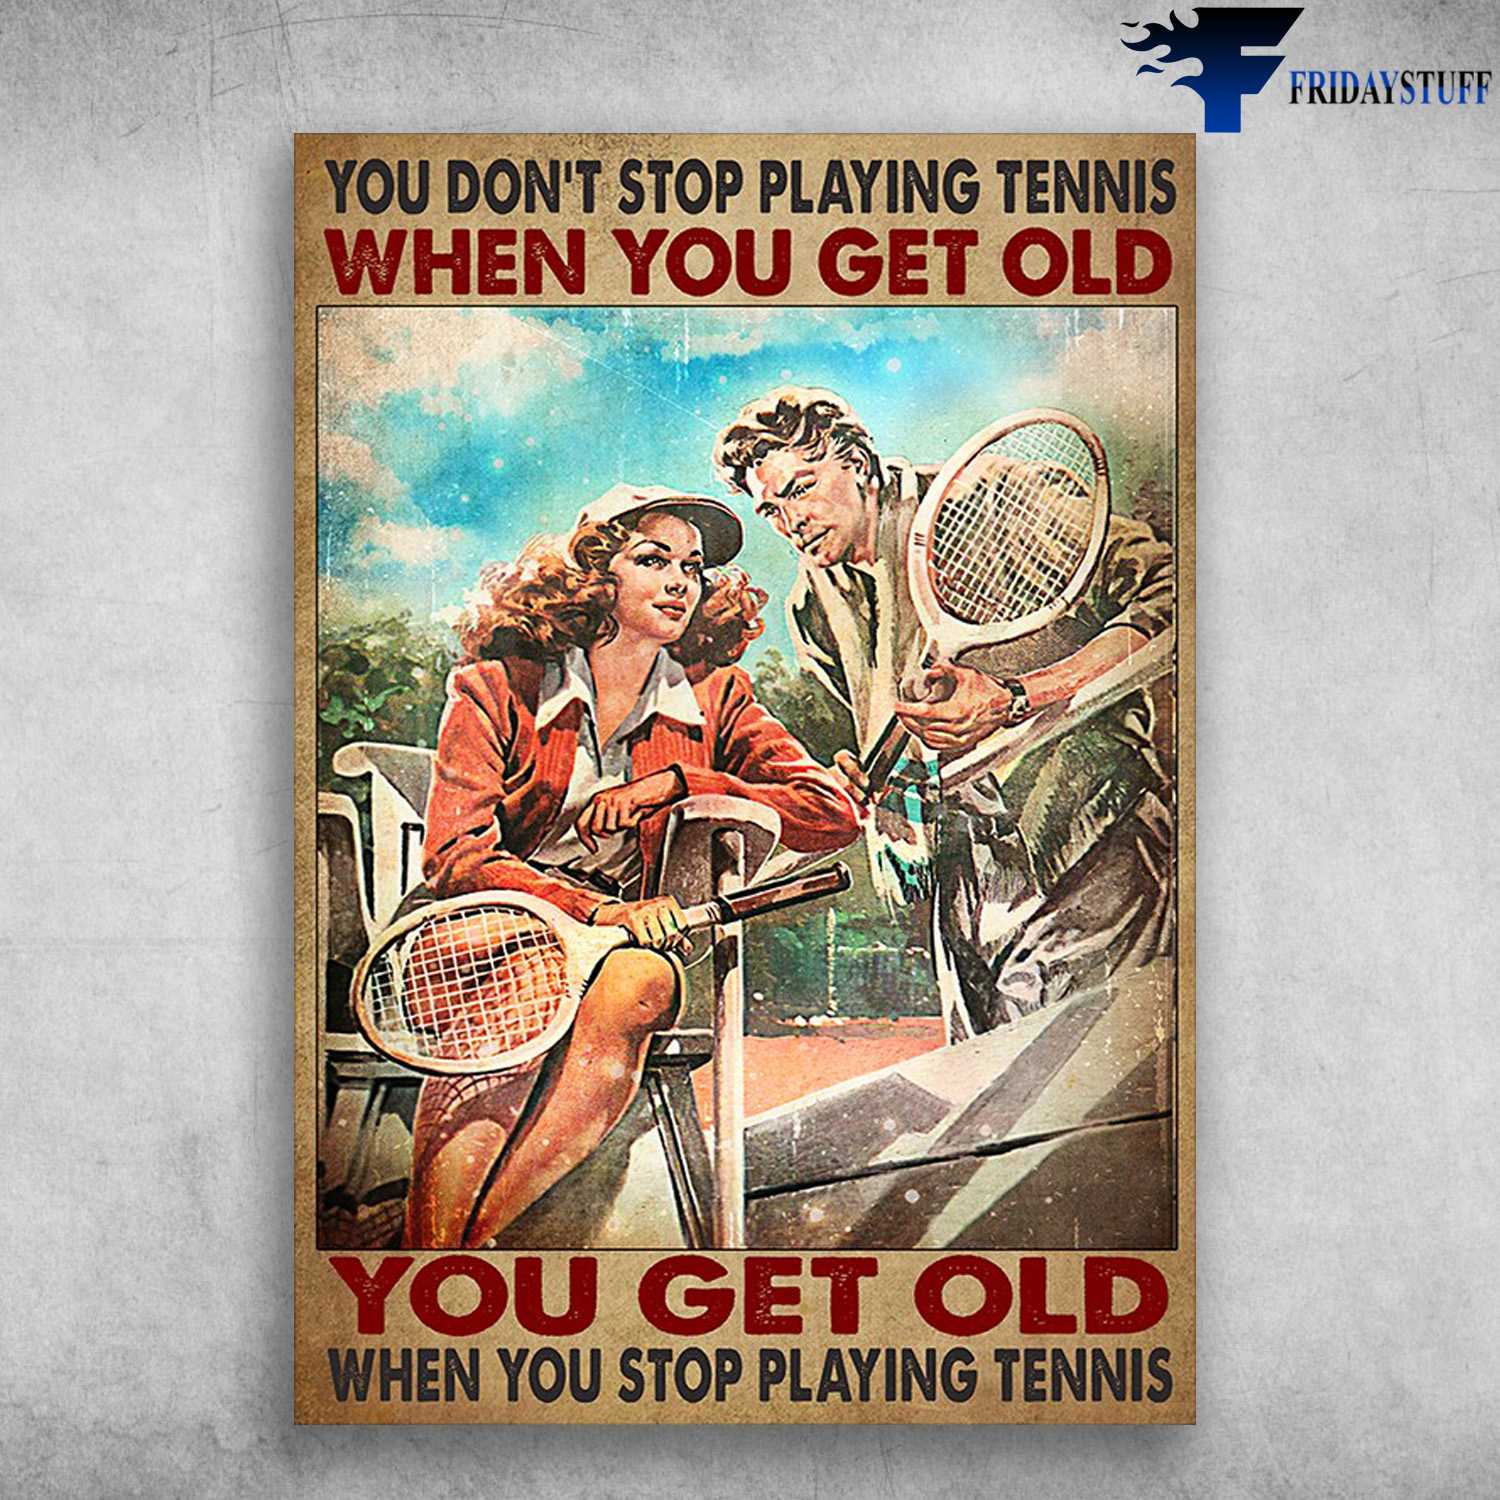 Tennis Couple - You Don't Stop Playing Tennis When You Get Old, You Get Old When You Stop Playing Tennis